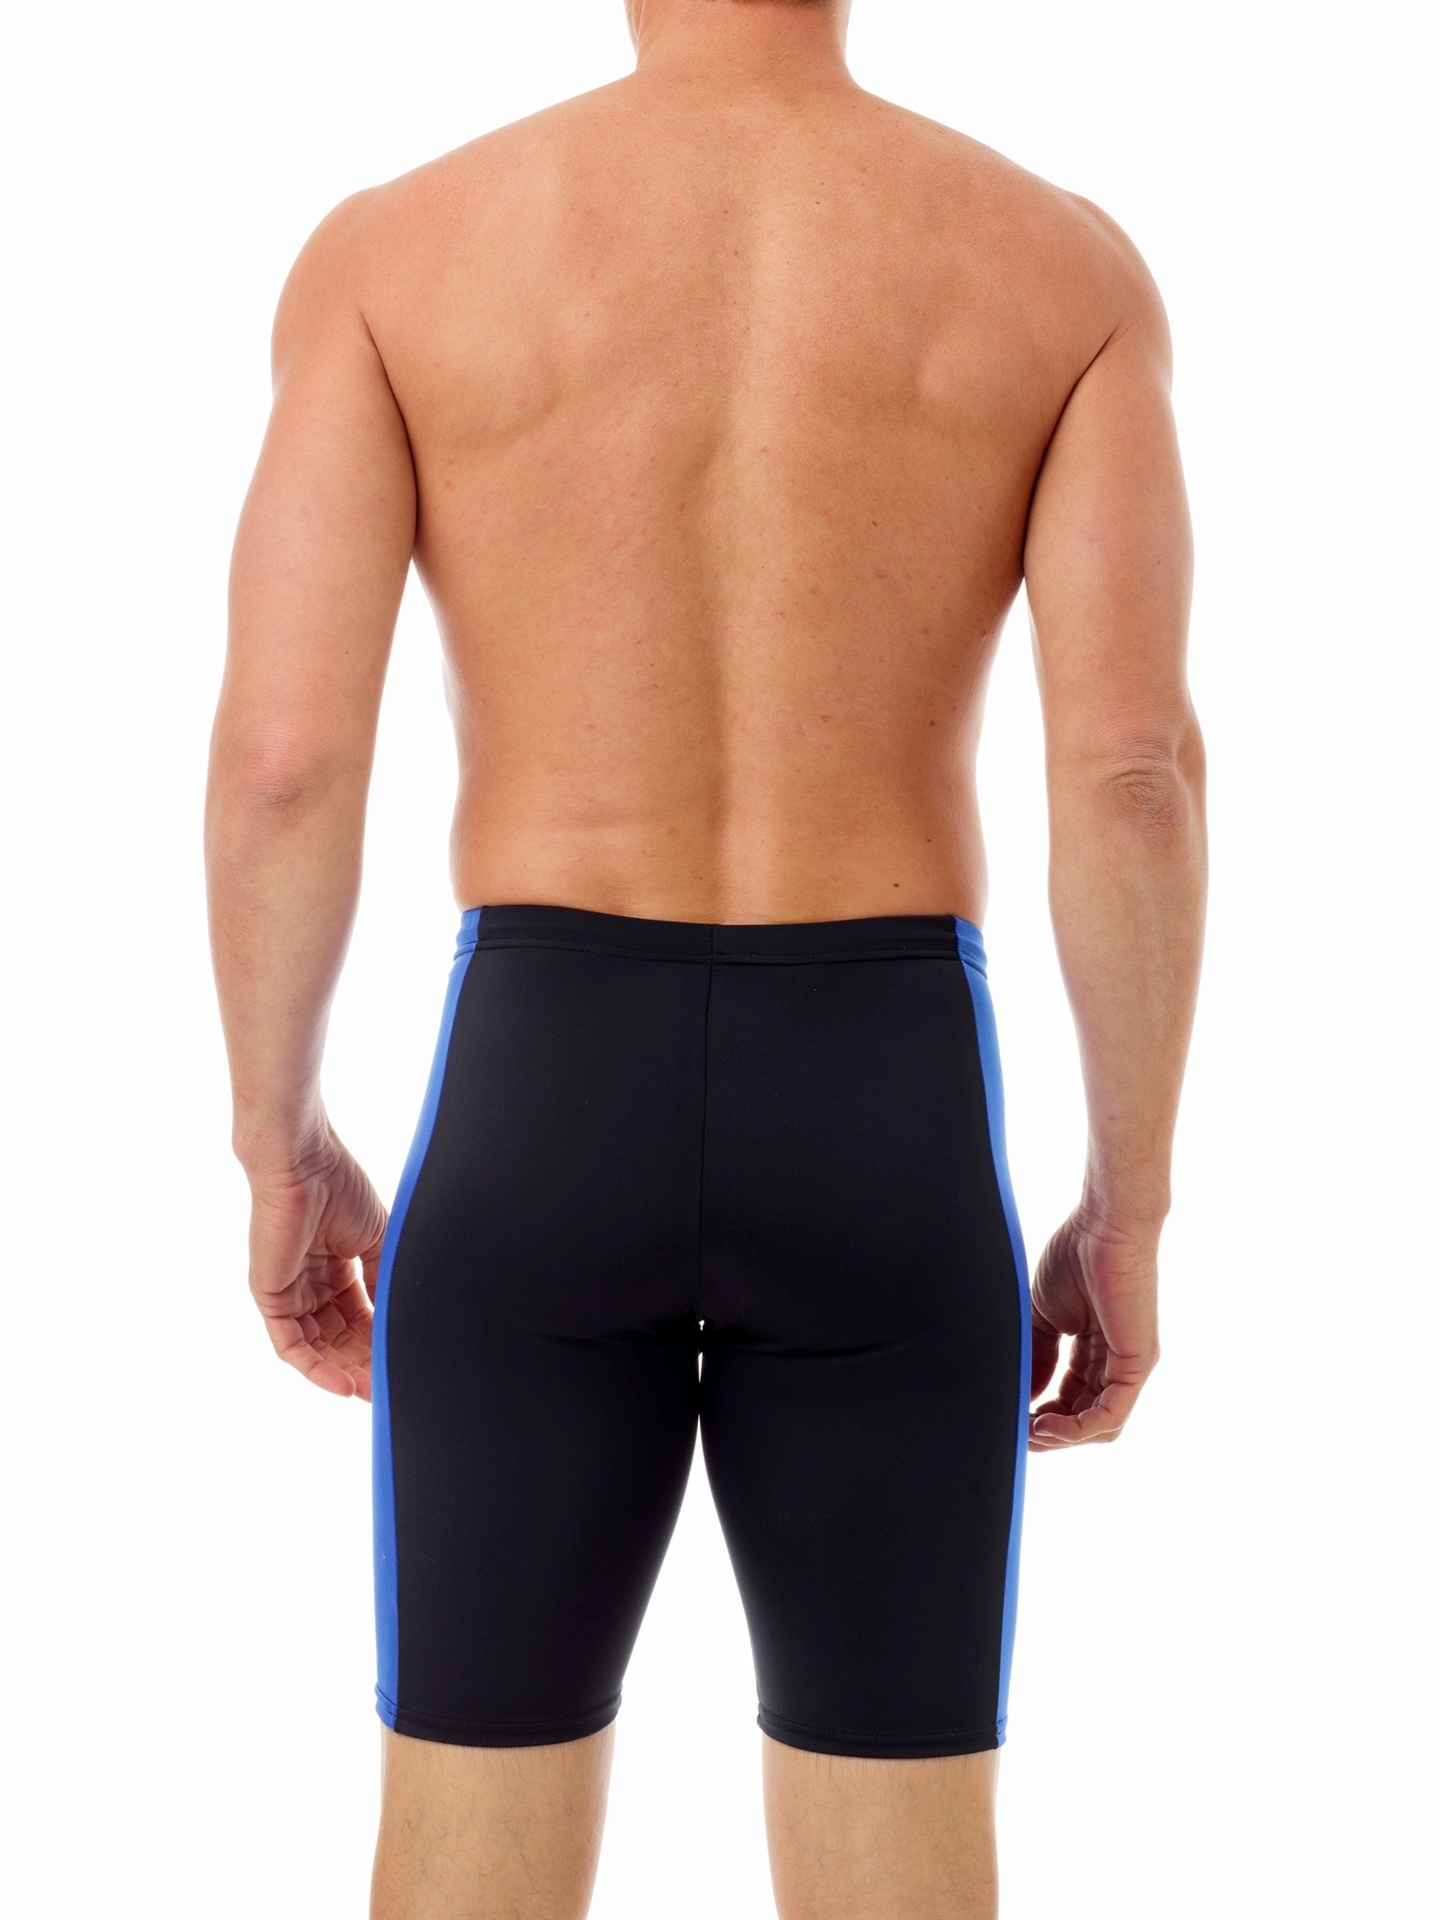 Details about   ACCLAIM Fitness Tianjin Mens Compression Swimming Jammer Nylon Lycra Shorts 